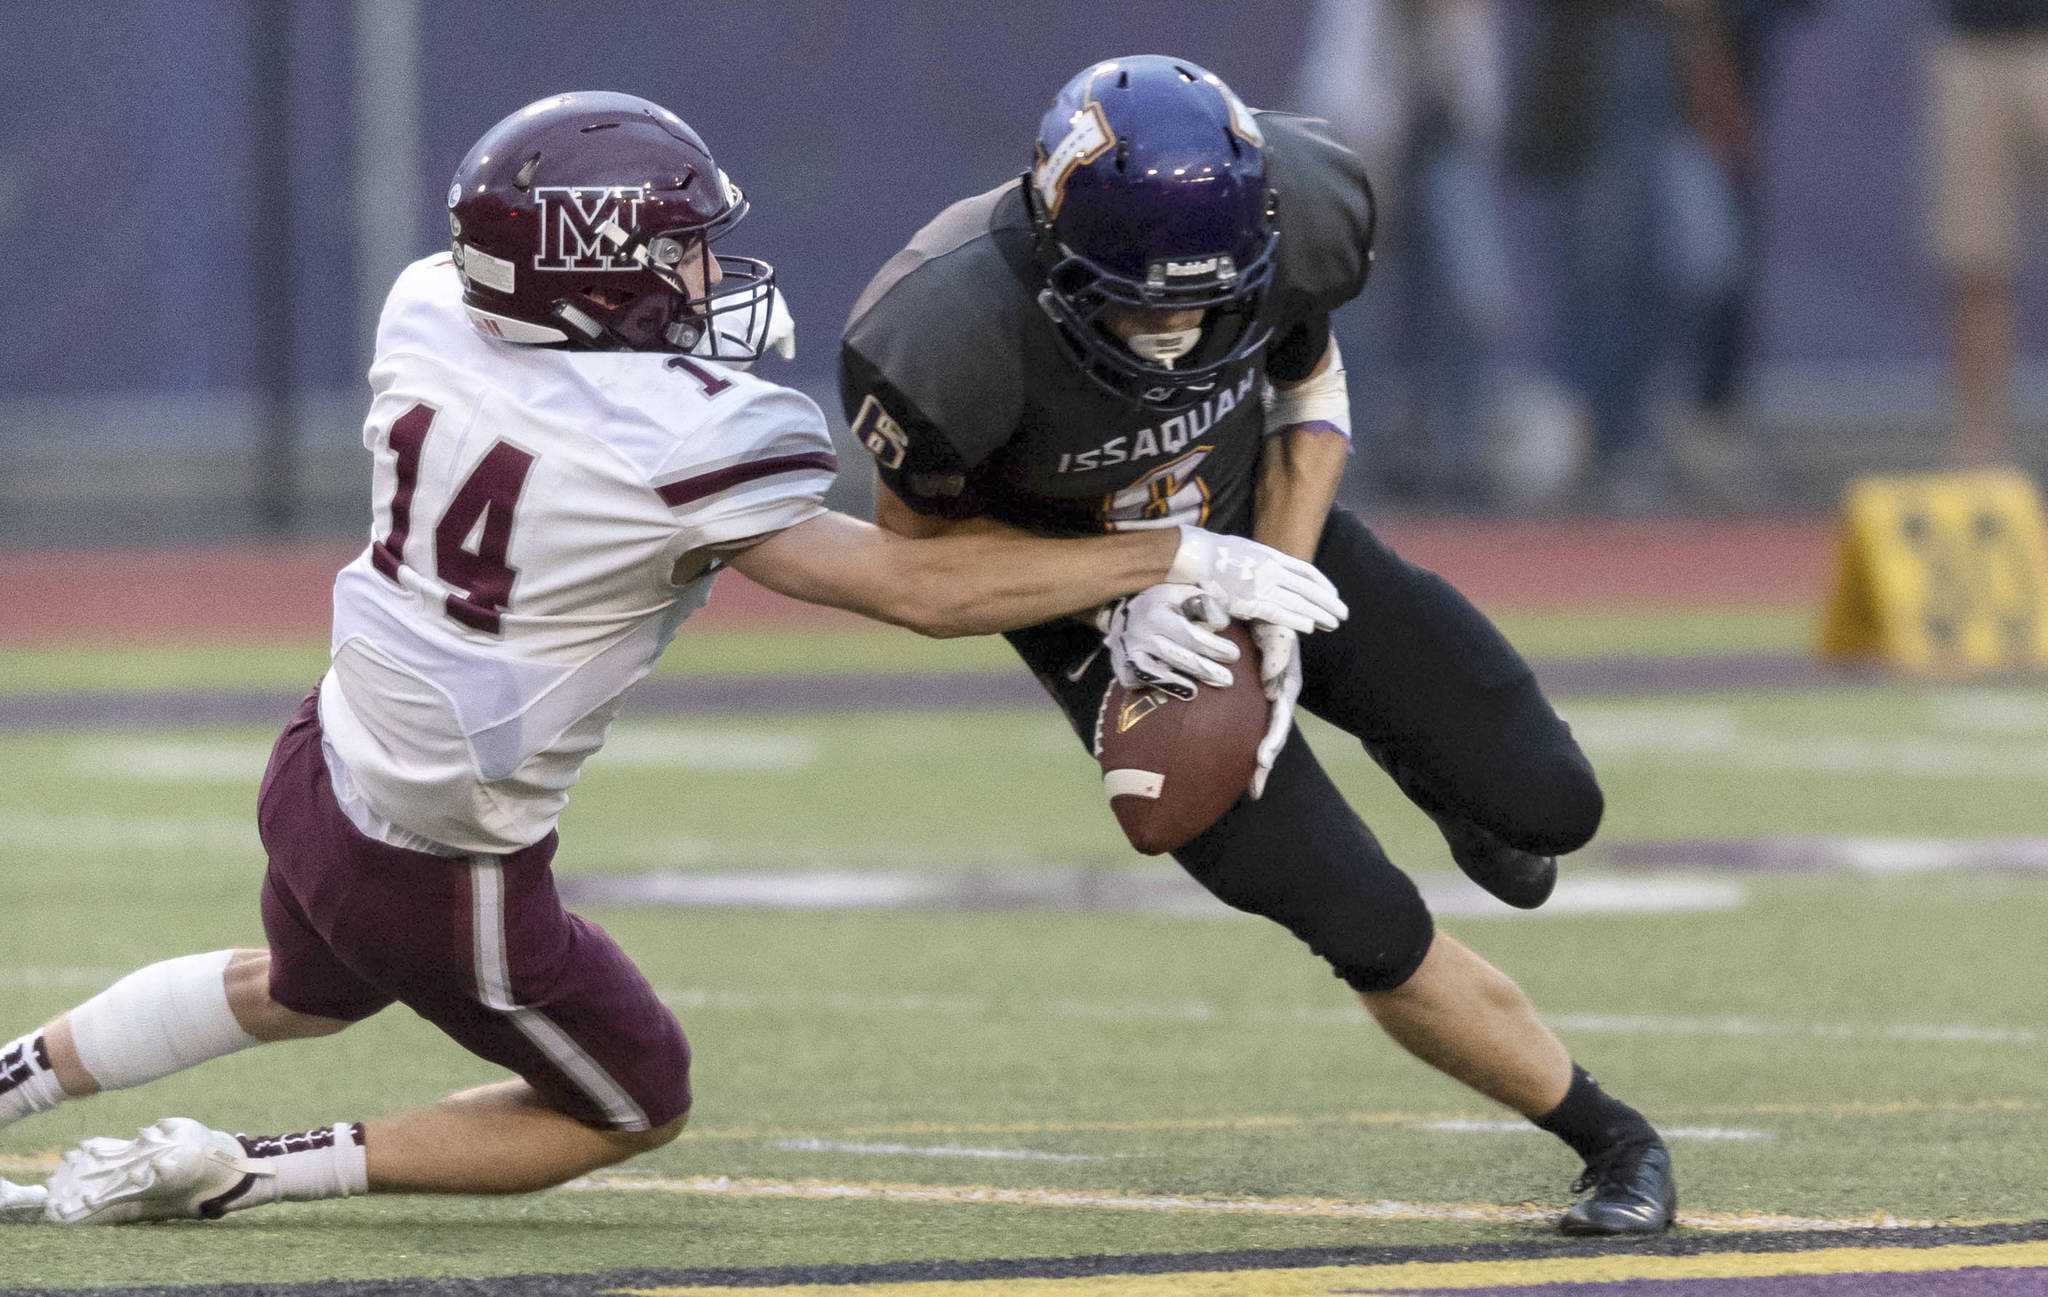 Mercer Island football player Hunter Johnson, left, makes a play against the Issaquah Eagles during a non-league game this past September. Johnson was one of three Islanders football players that captured 2A/3A KingCo first-team, all-league honors. Photo courtesy of Patrick Krohn/Patrick Krohn Photography